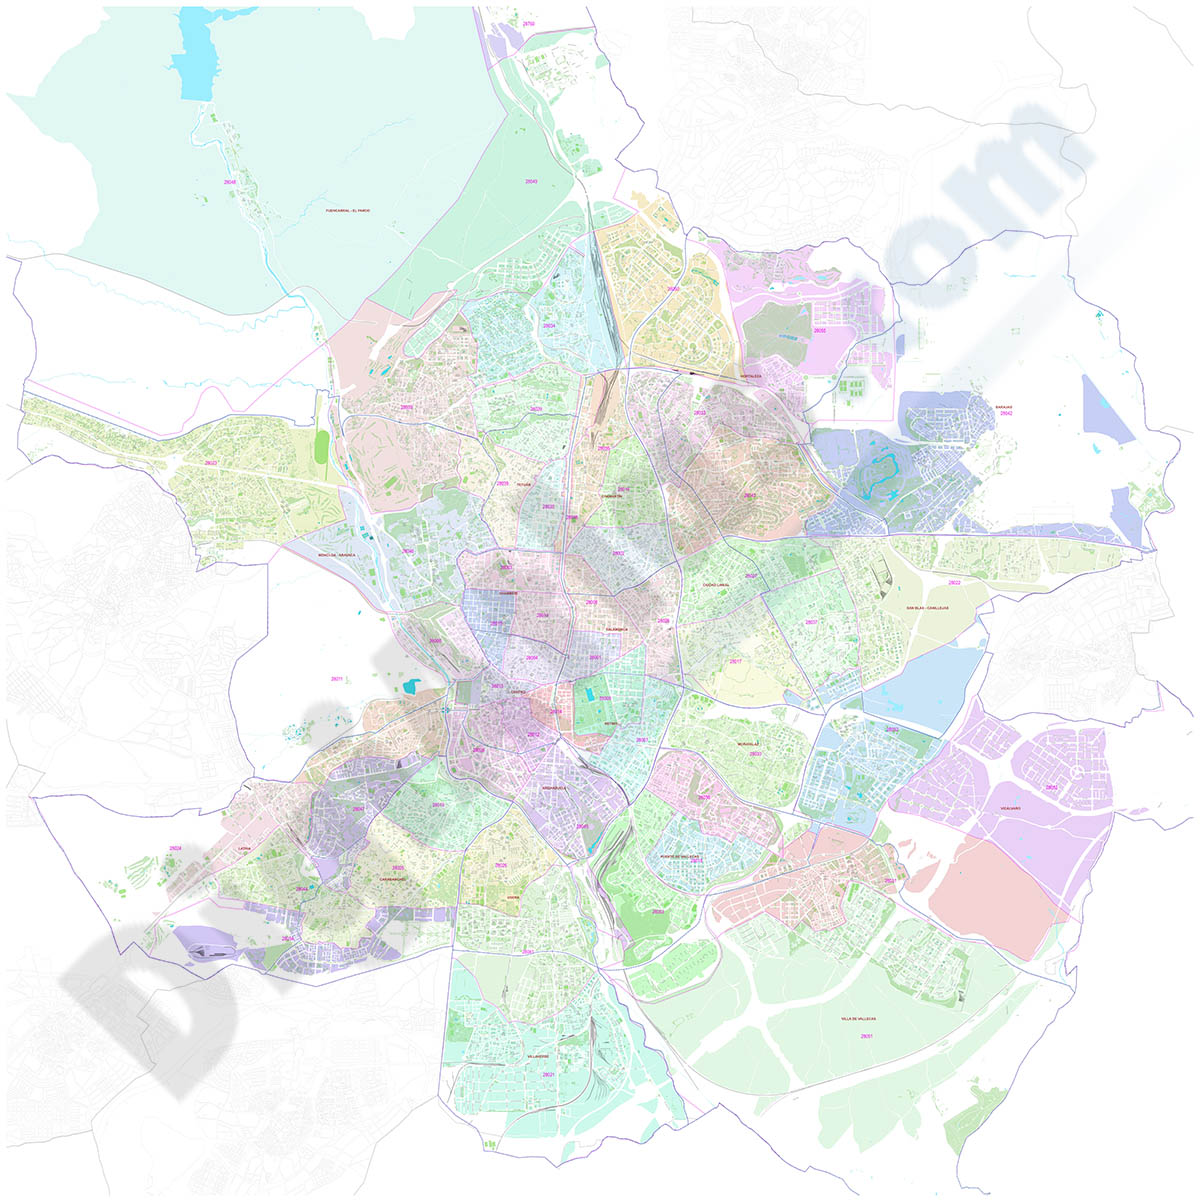 Madrid city map with postal code areas